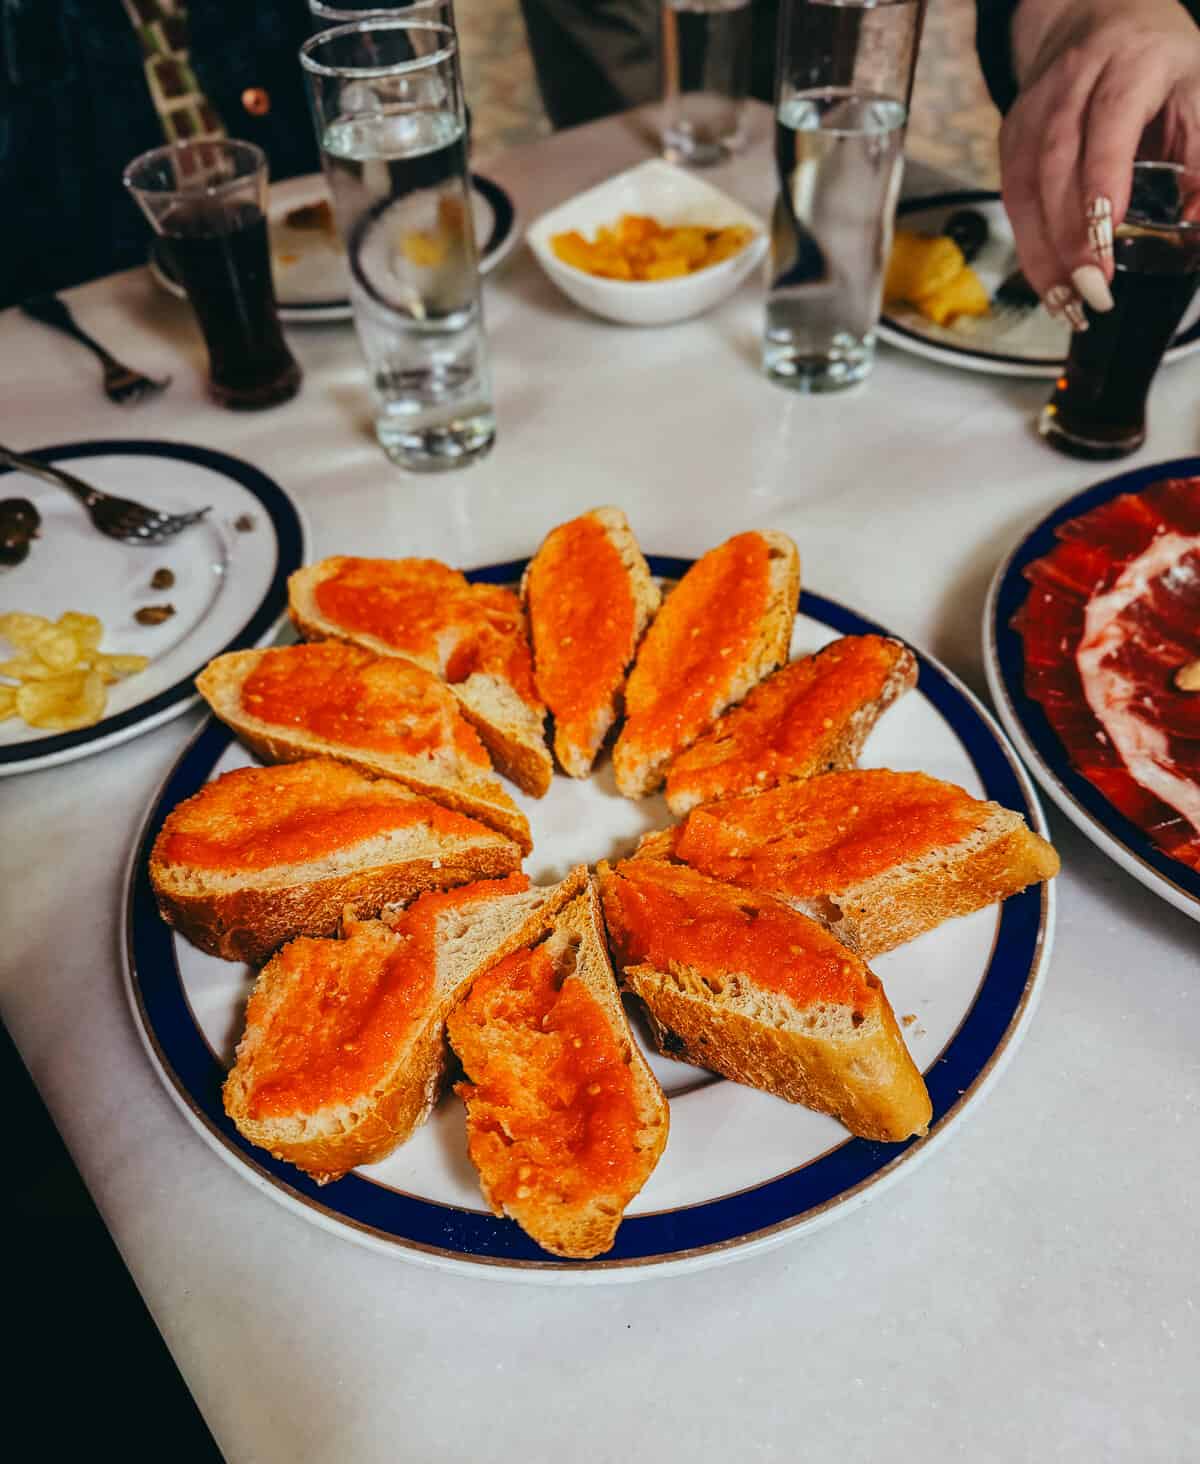 A plate of toasted bread topped with a rich, orange tomato spread, served on a white and blue rimmed plate beside a tray of sliced ham and other tapas, indicating a typical Spanish meal.